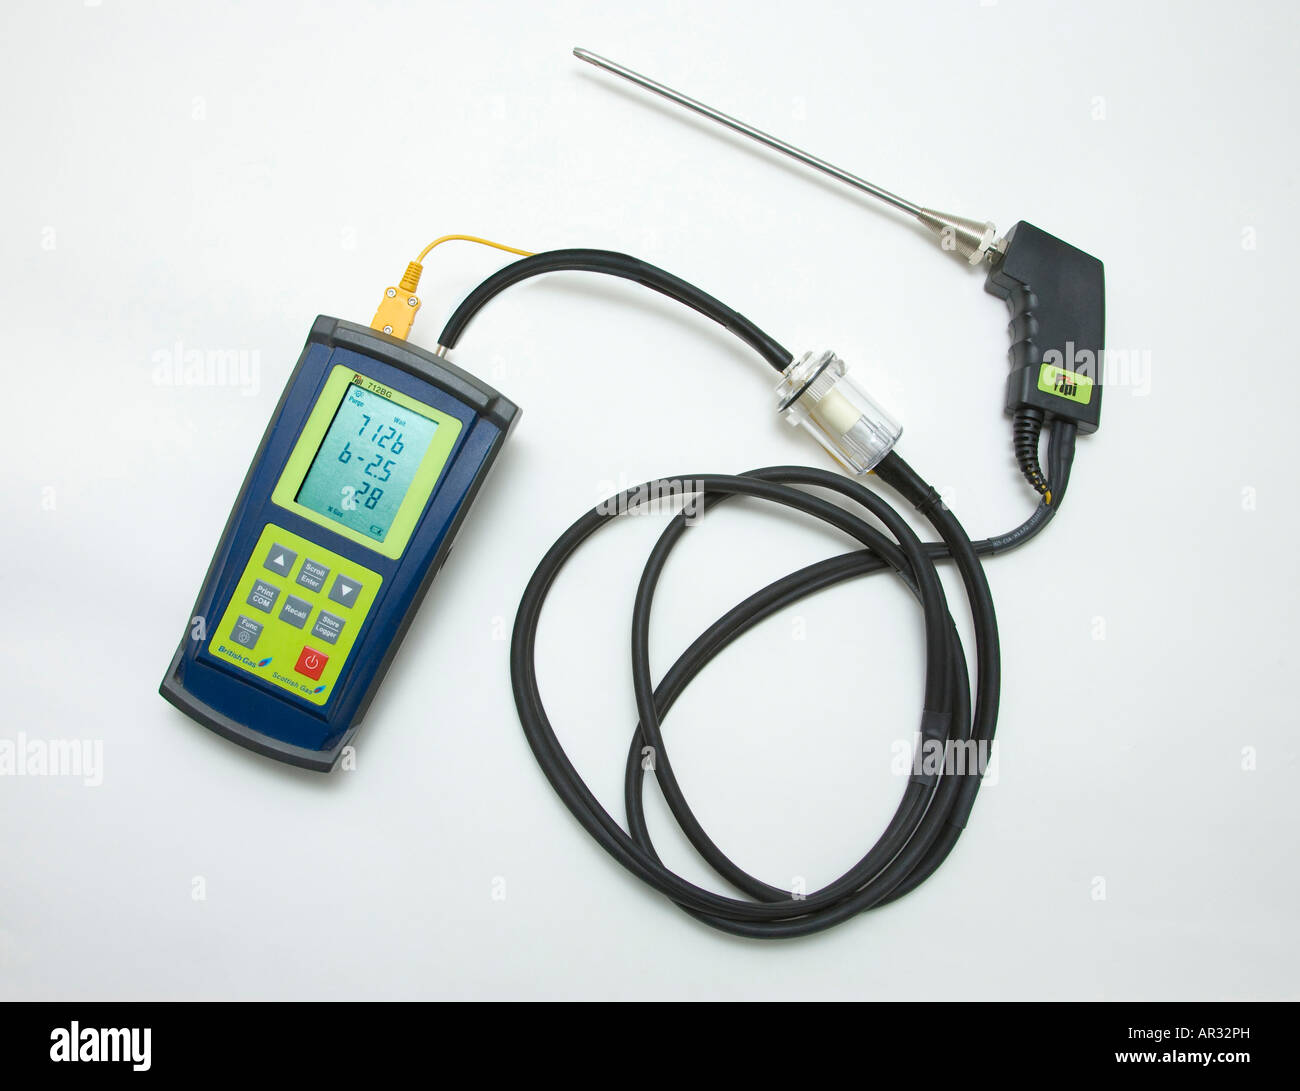 TDI 712 chimney flue gas analyser, measuring temperature and carbon monoxide levels for gas heater performance and safety Stock Photo